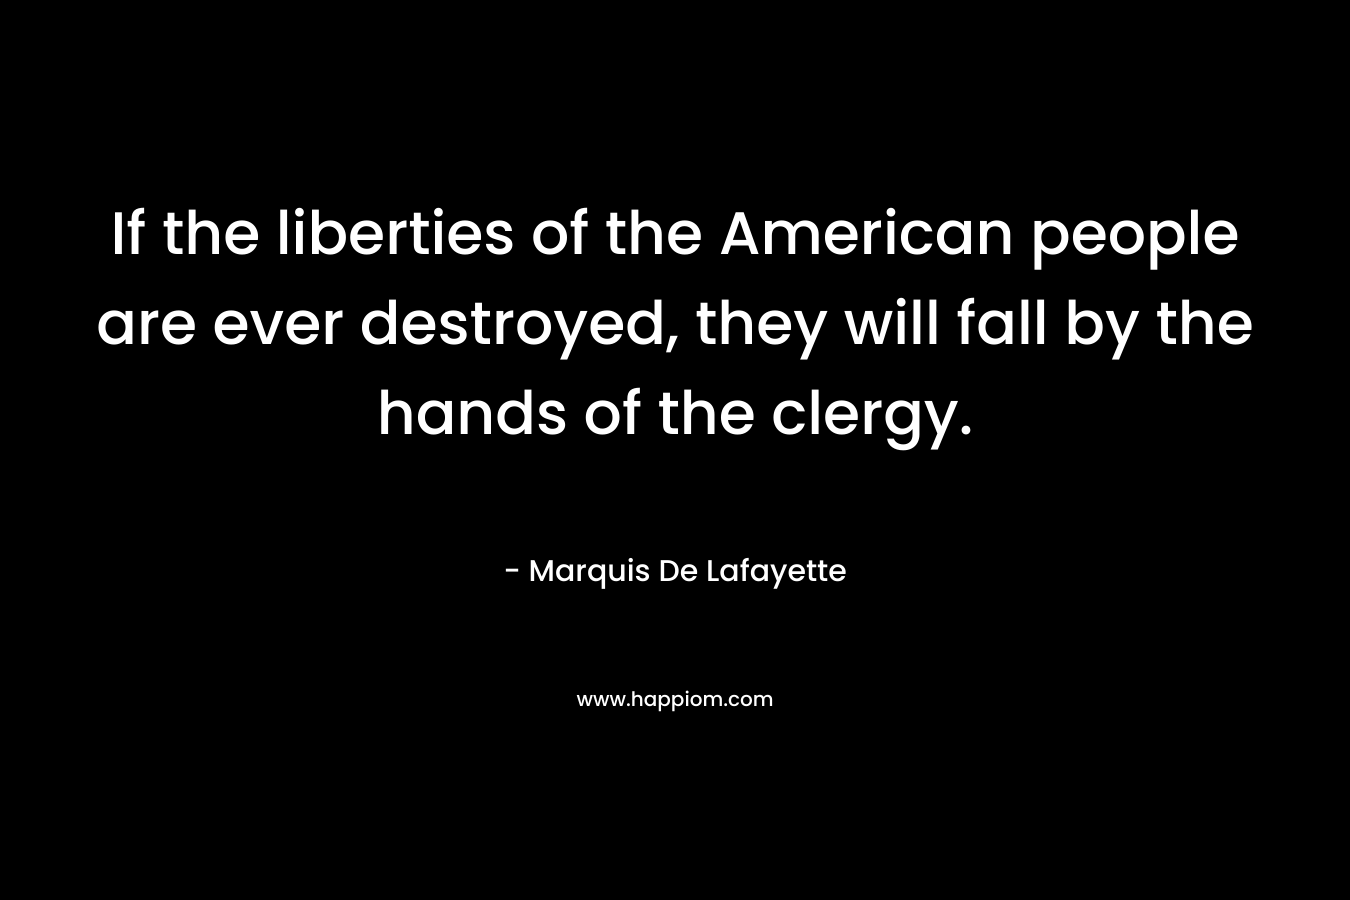 If the liberties of the American people are ever destroyed, they will fall by the hands of the clergy.